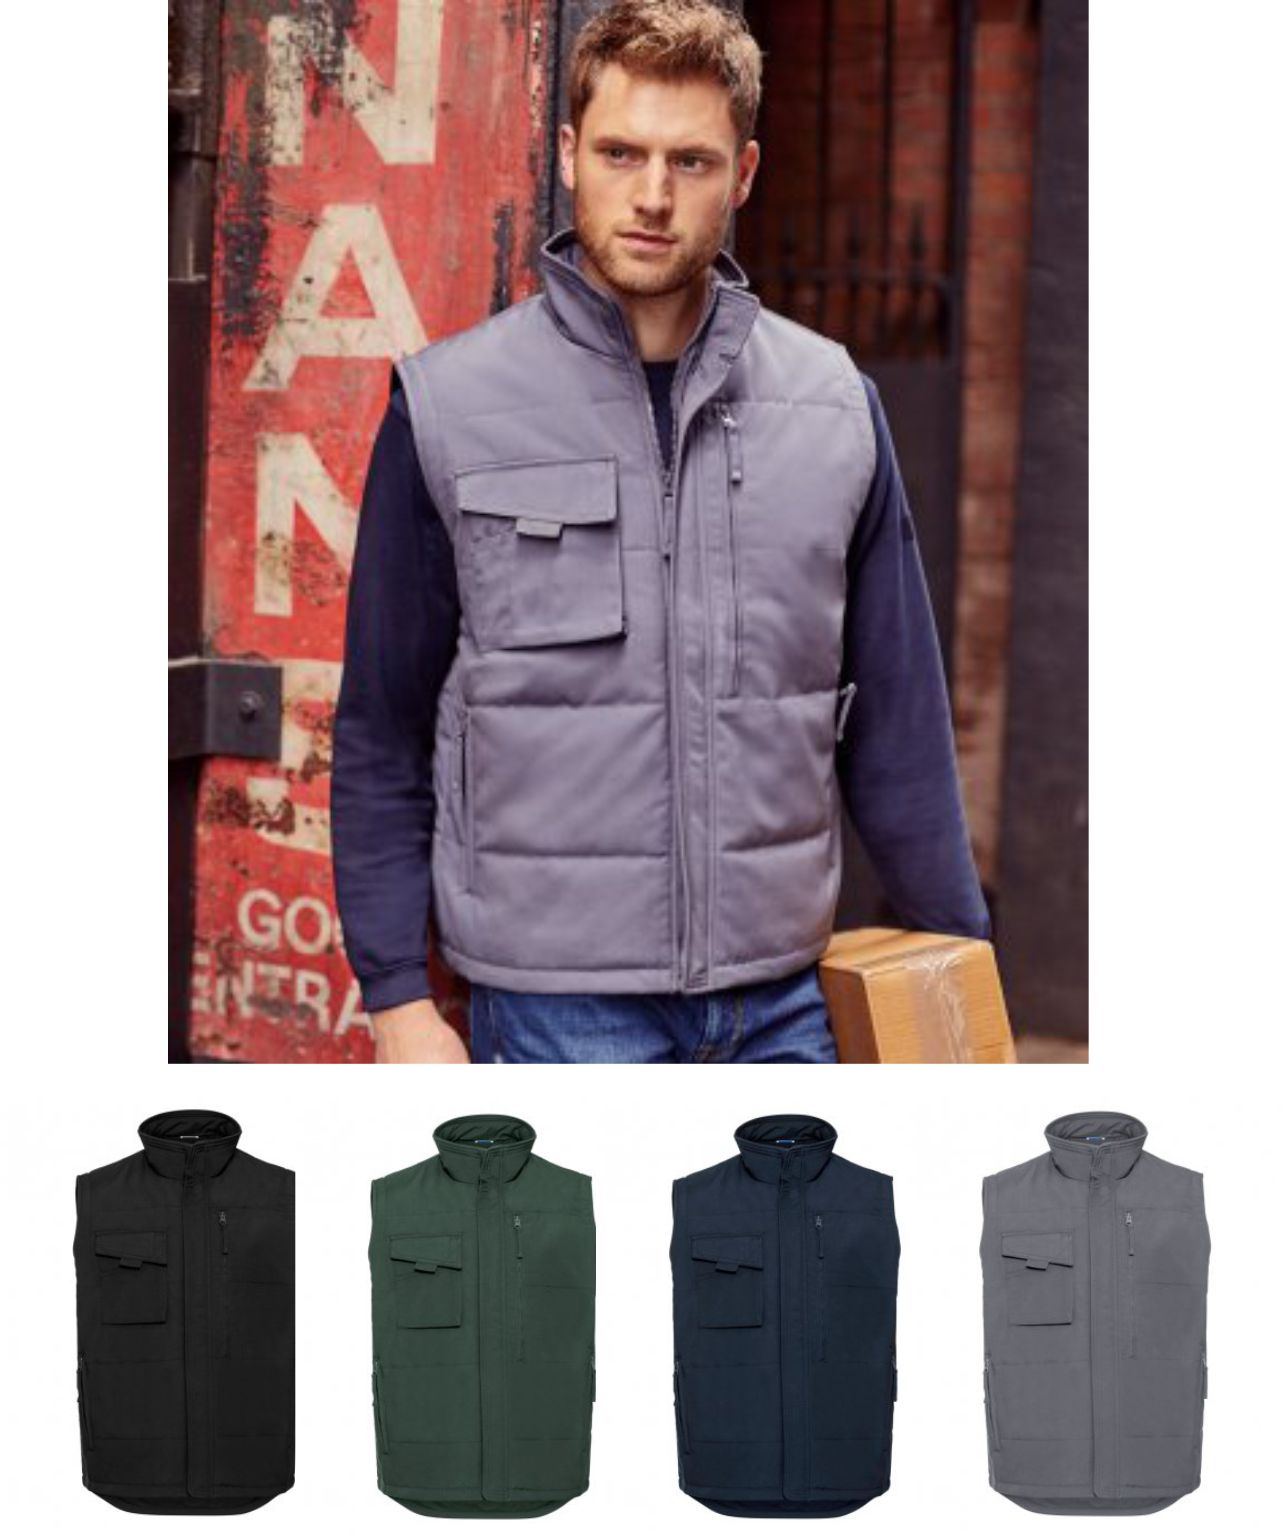 Russell's 014M Gilet